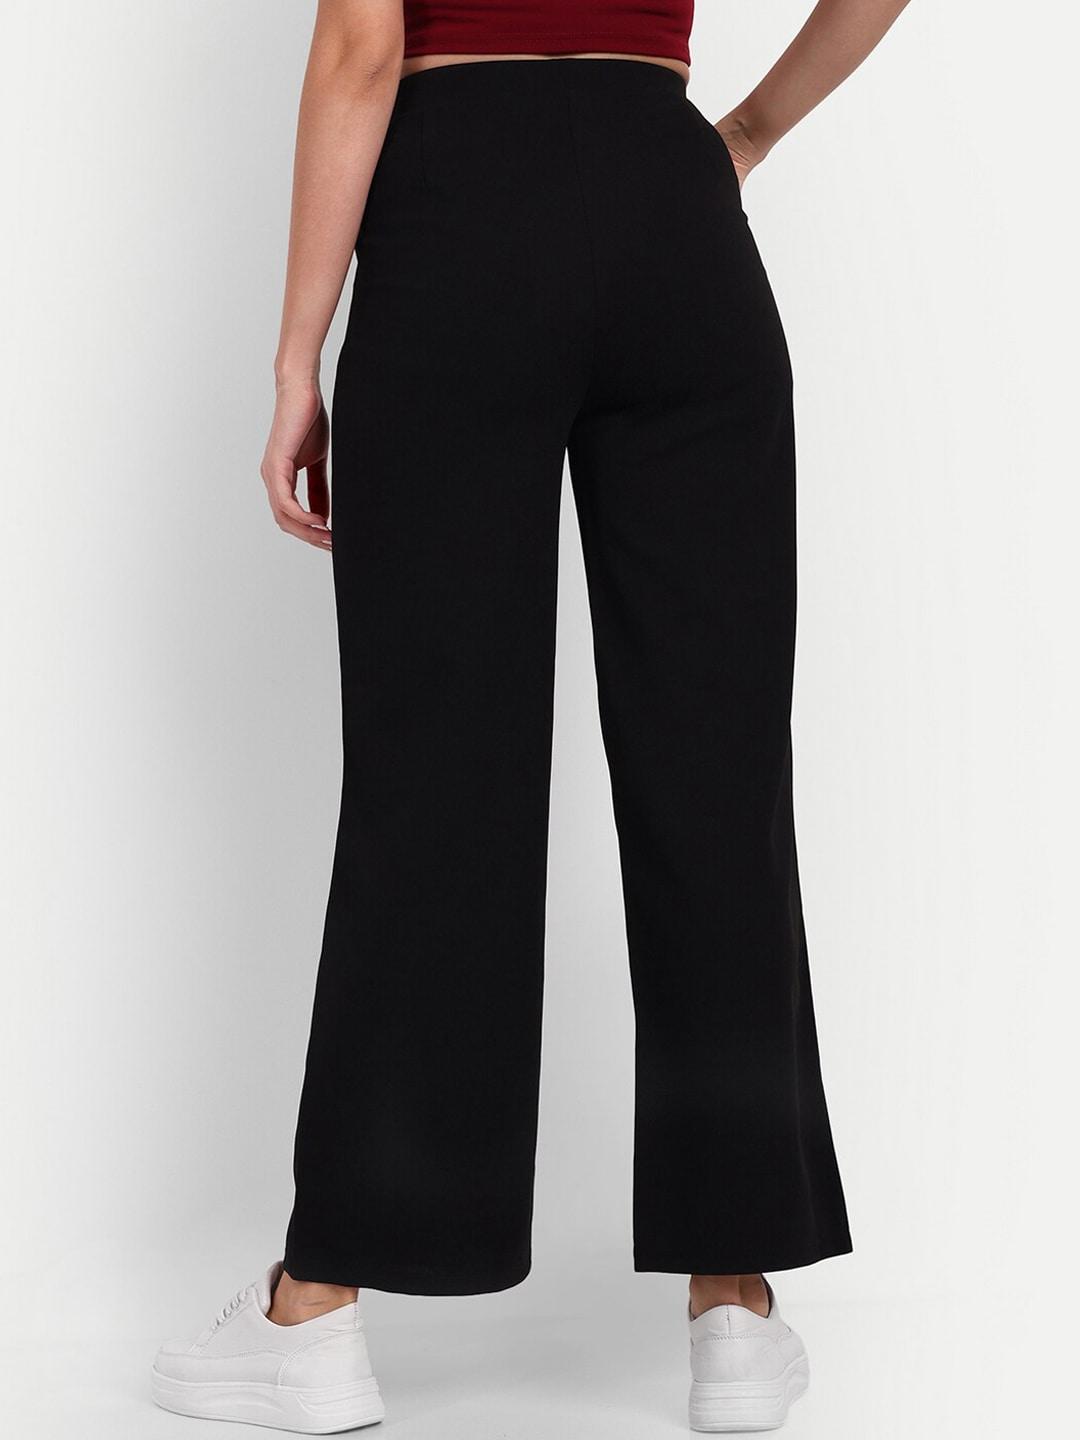 next-one-women-loose-fit-high-rise-parallel-trousers